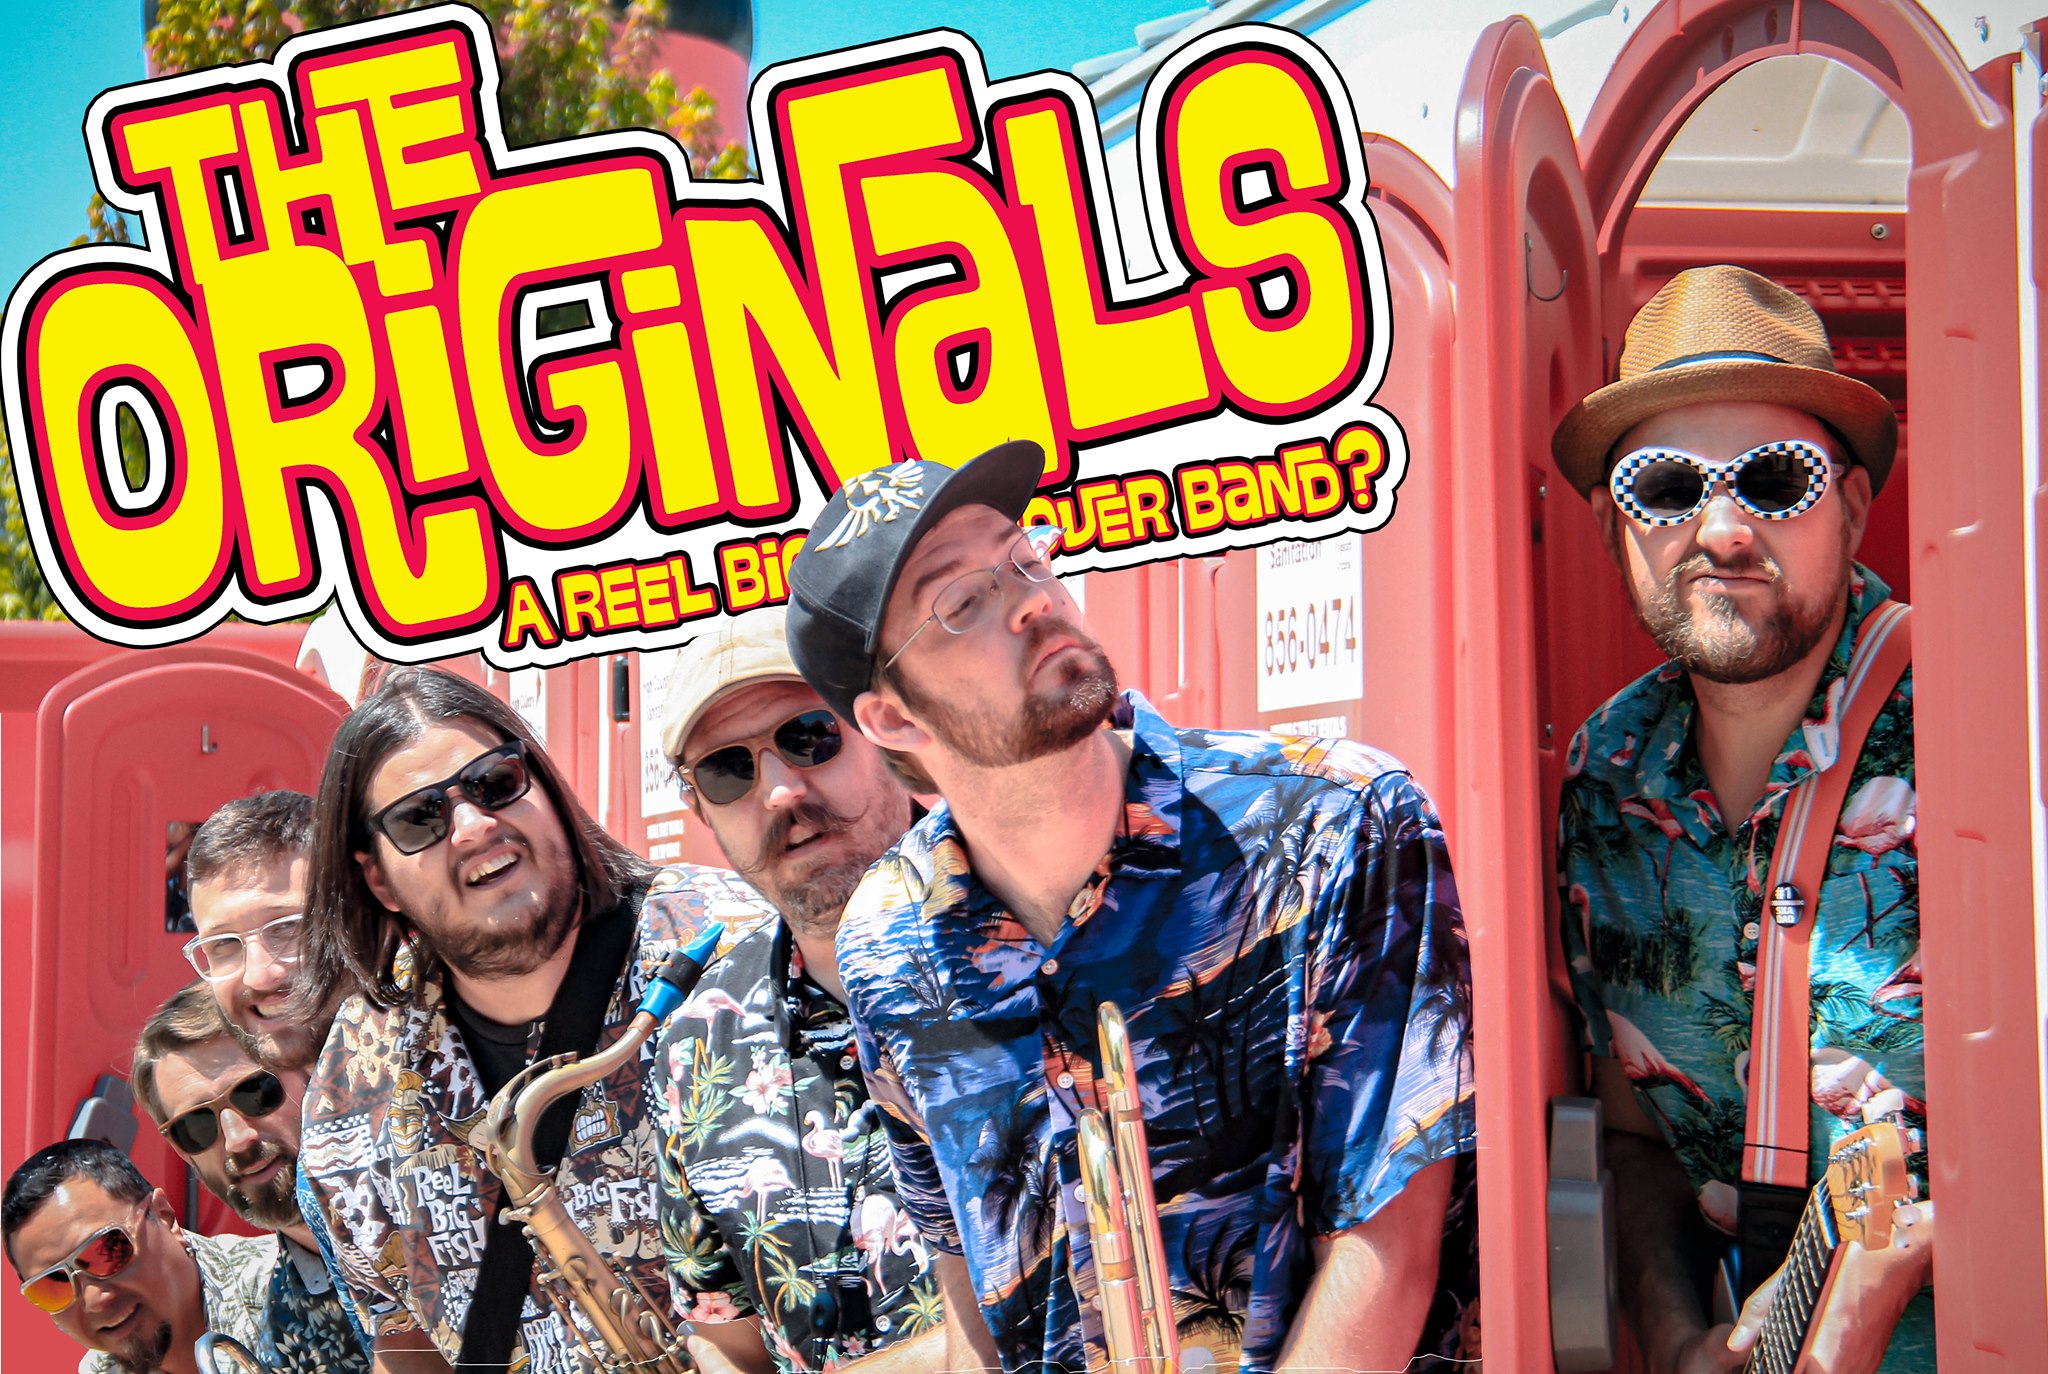 The Originals (Reel Big Fish Tribute Band) in the Gopher Hole